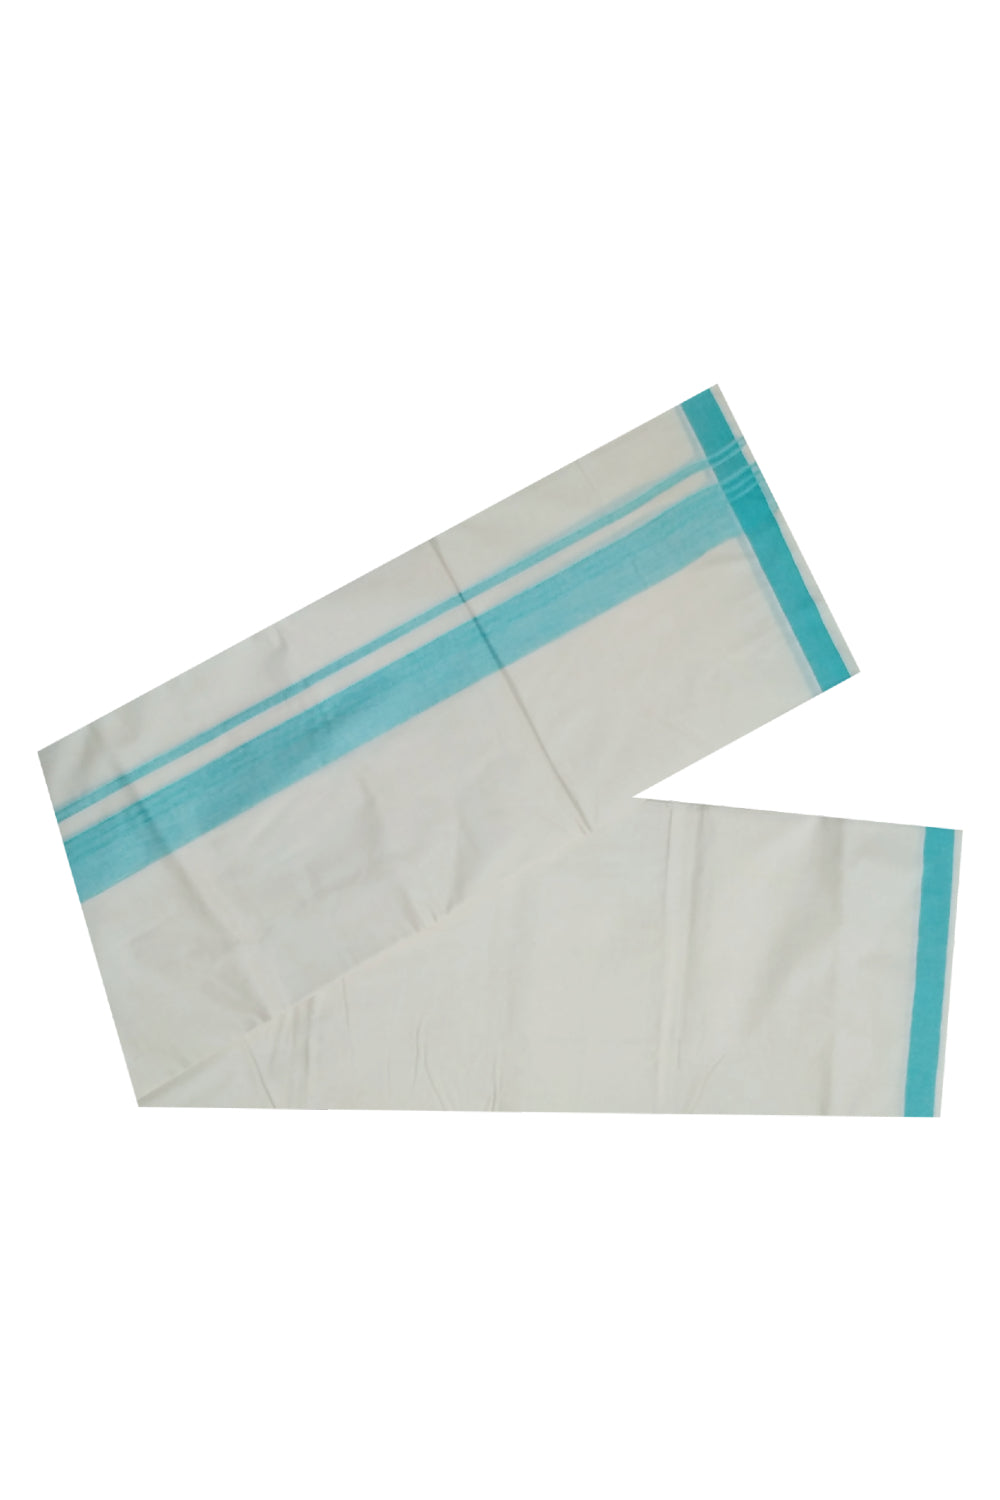 Off White Pure Cotton Mundu with Turquoise Border (South Indian Dhoti)